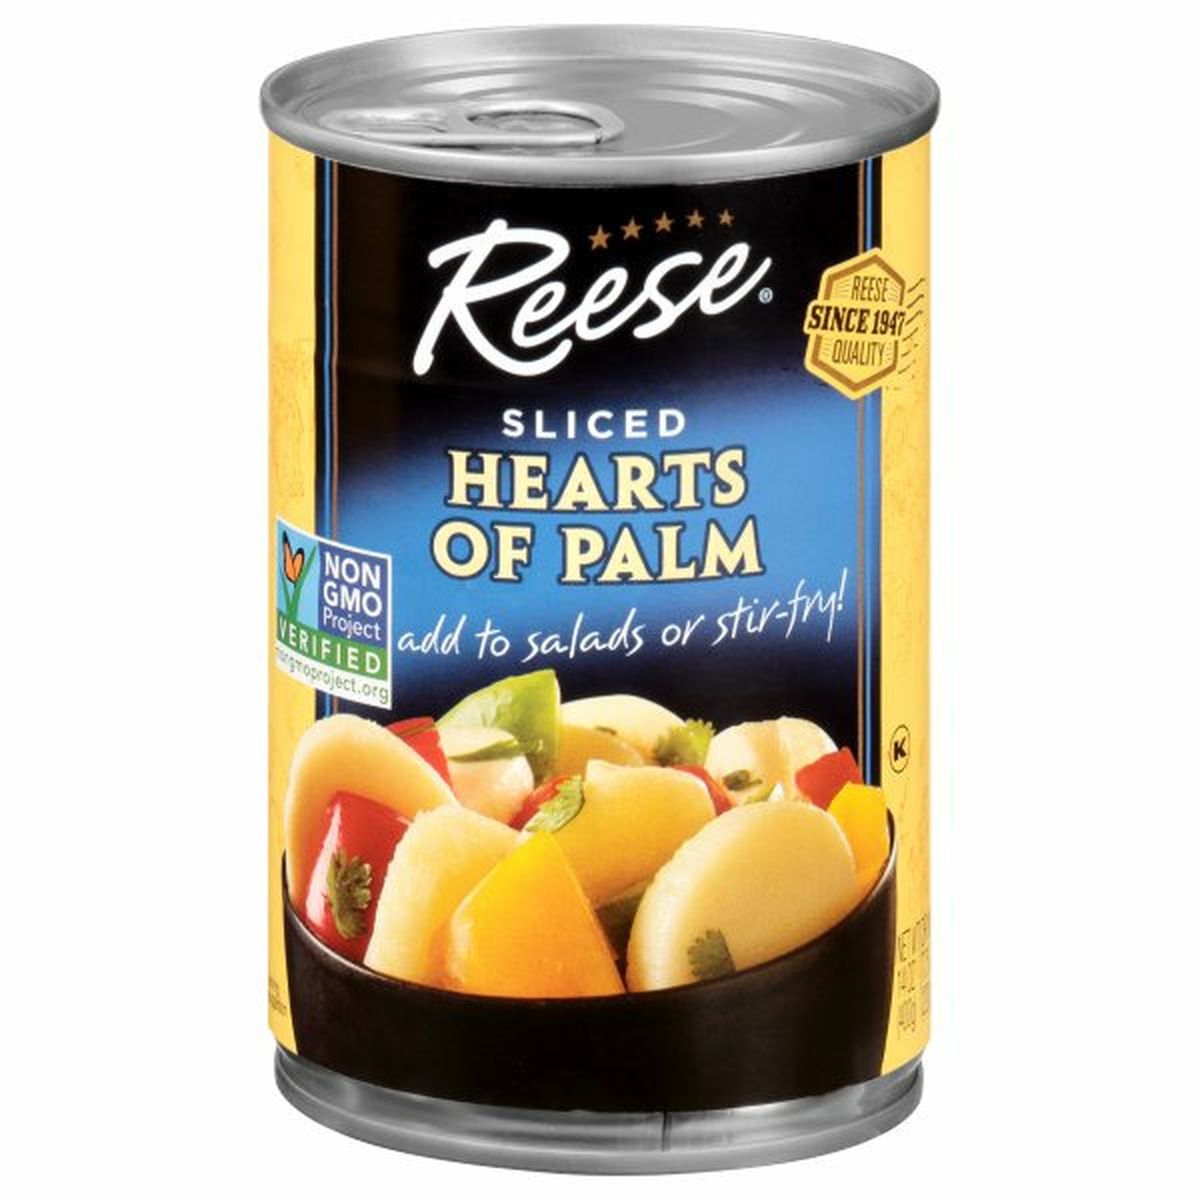 Calories in Reese's Hearts of Palm, Sliced